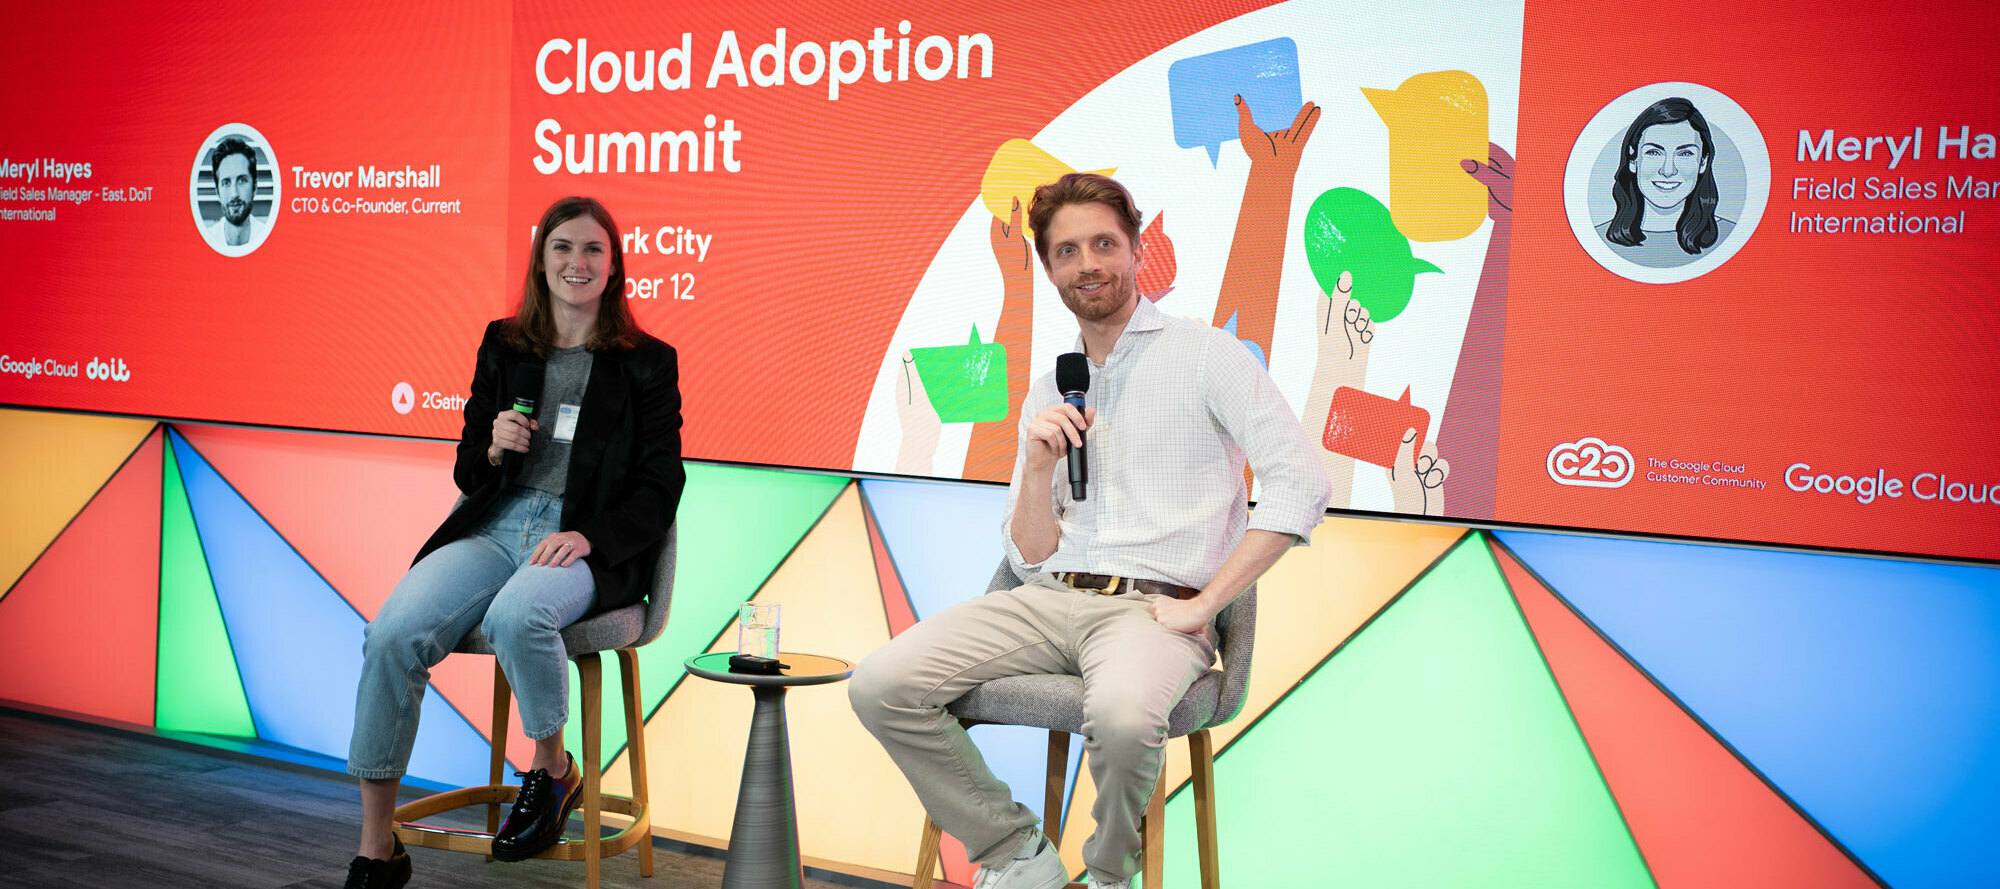 Turning Imagination into Reality: Catching Up with Trevor Marshall at Cloud Adoption Summit New York City